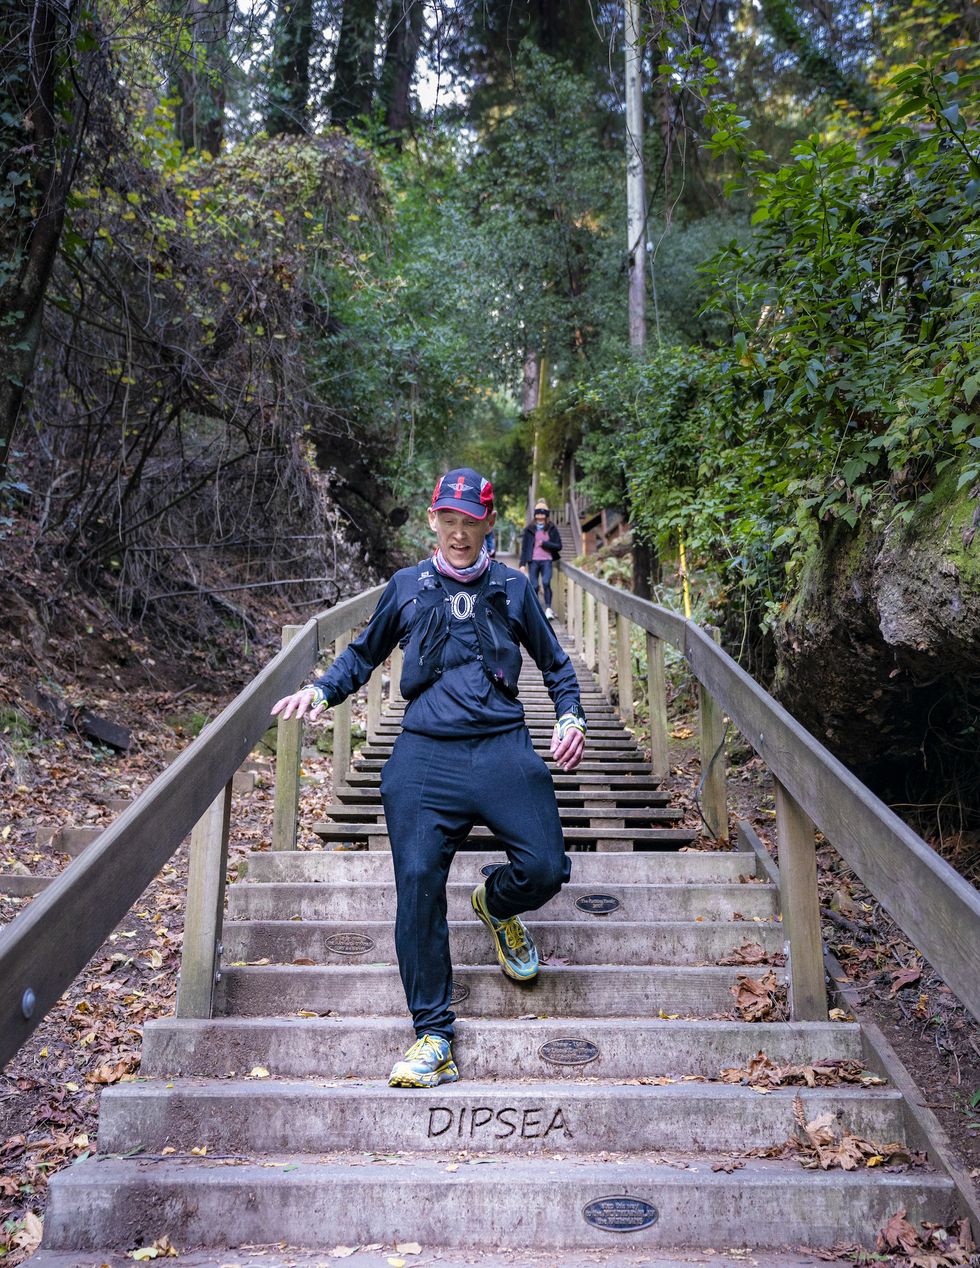 bradley fenner running down the dipsea stairs during his quad quad dipsea